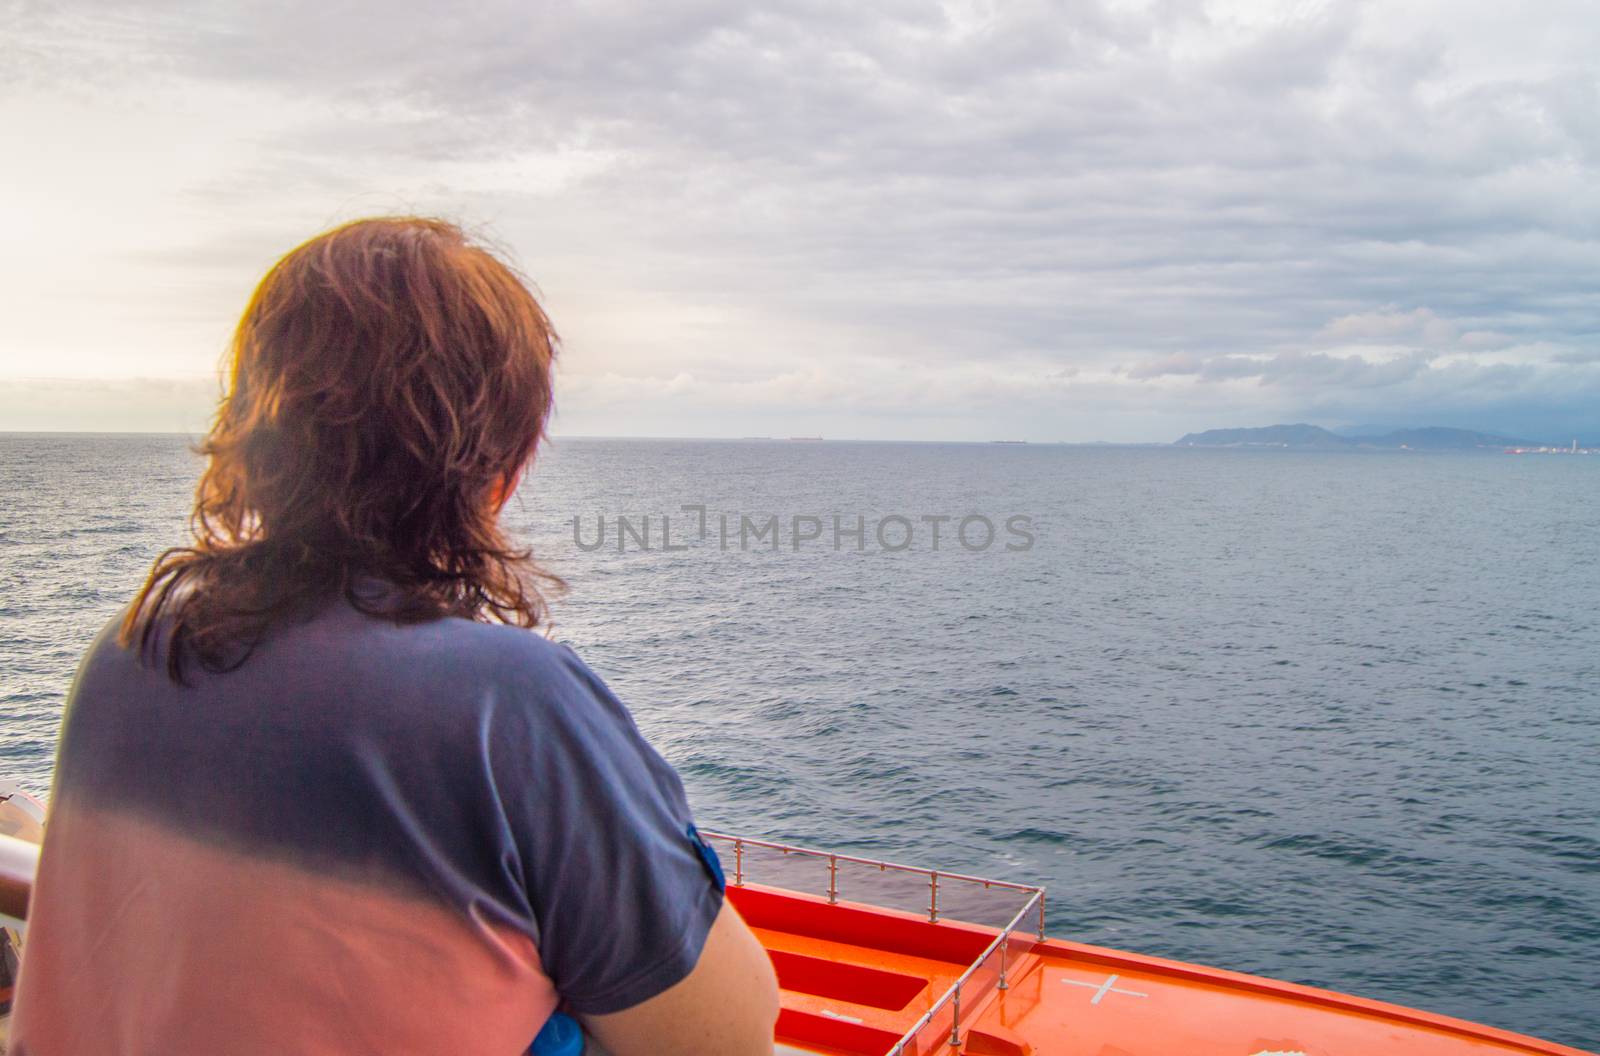 Happy woman looking at the coastline and the sea, enjoying the cruise ship journey, the view from the back.